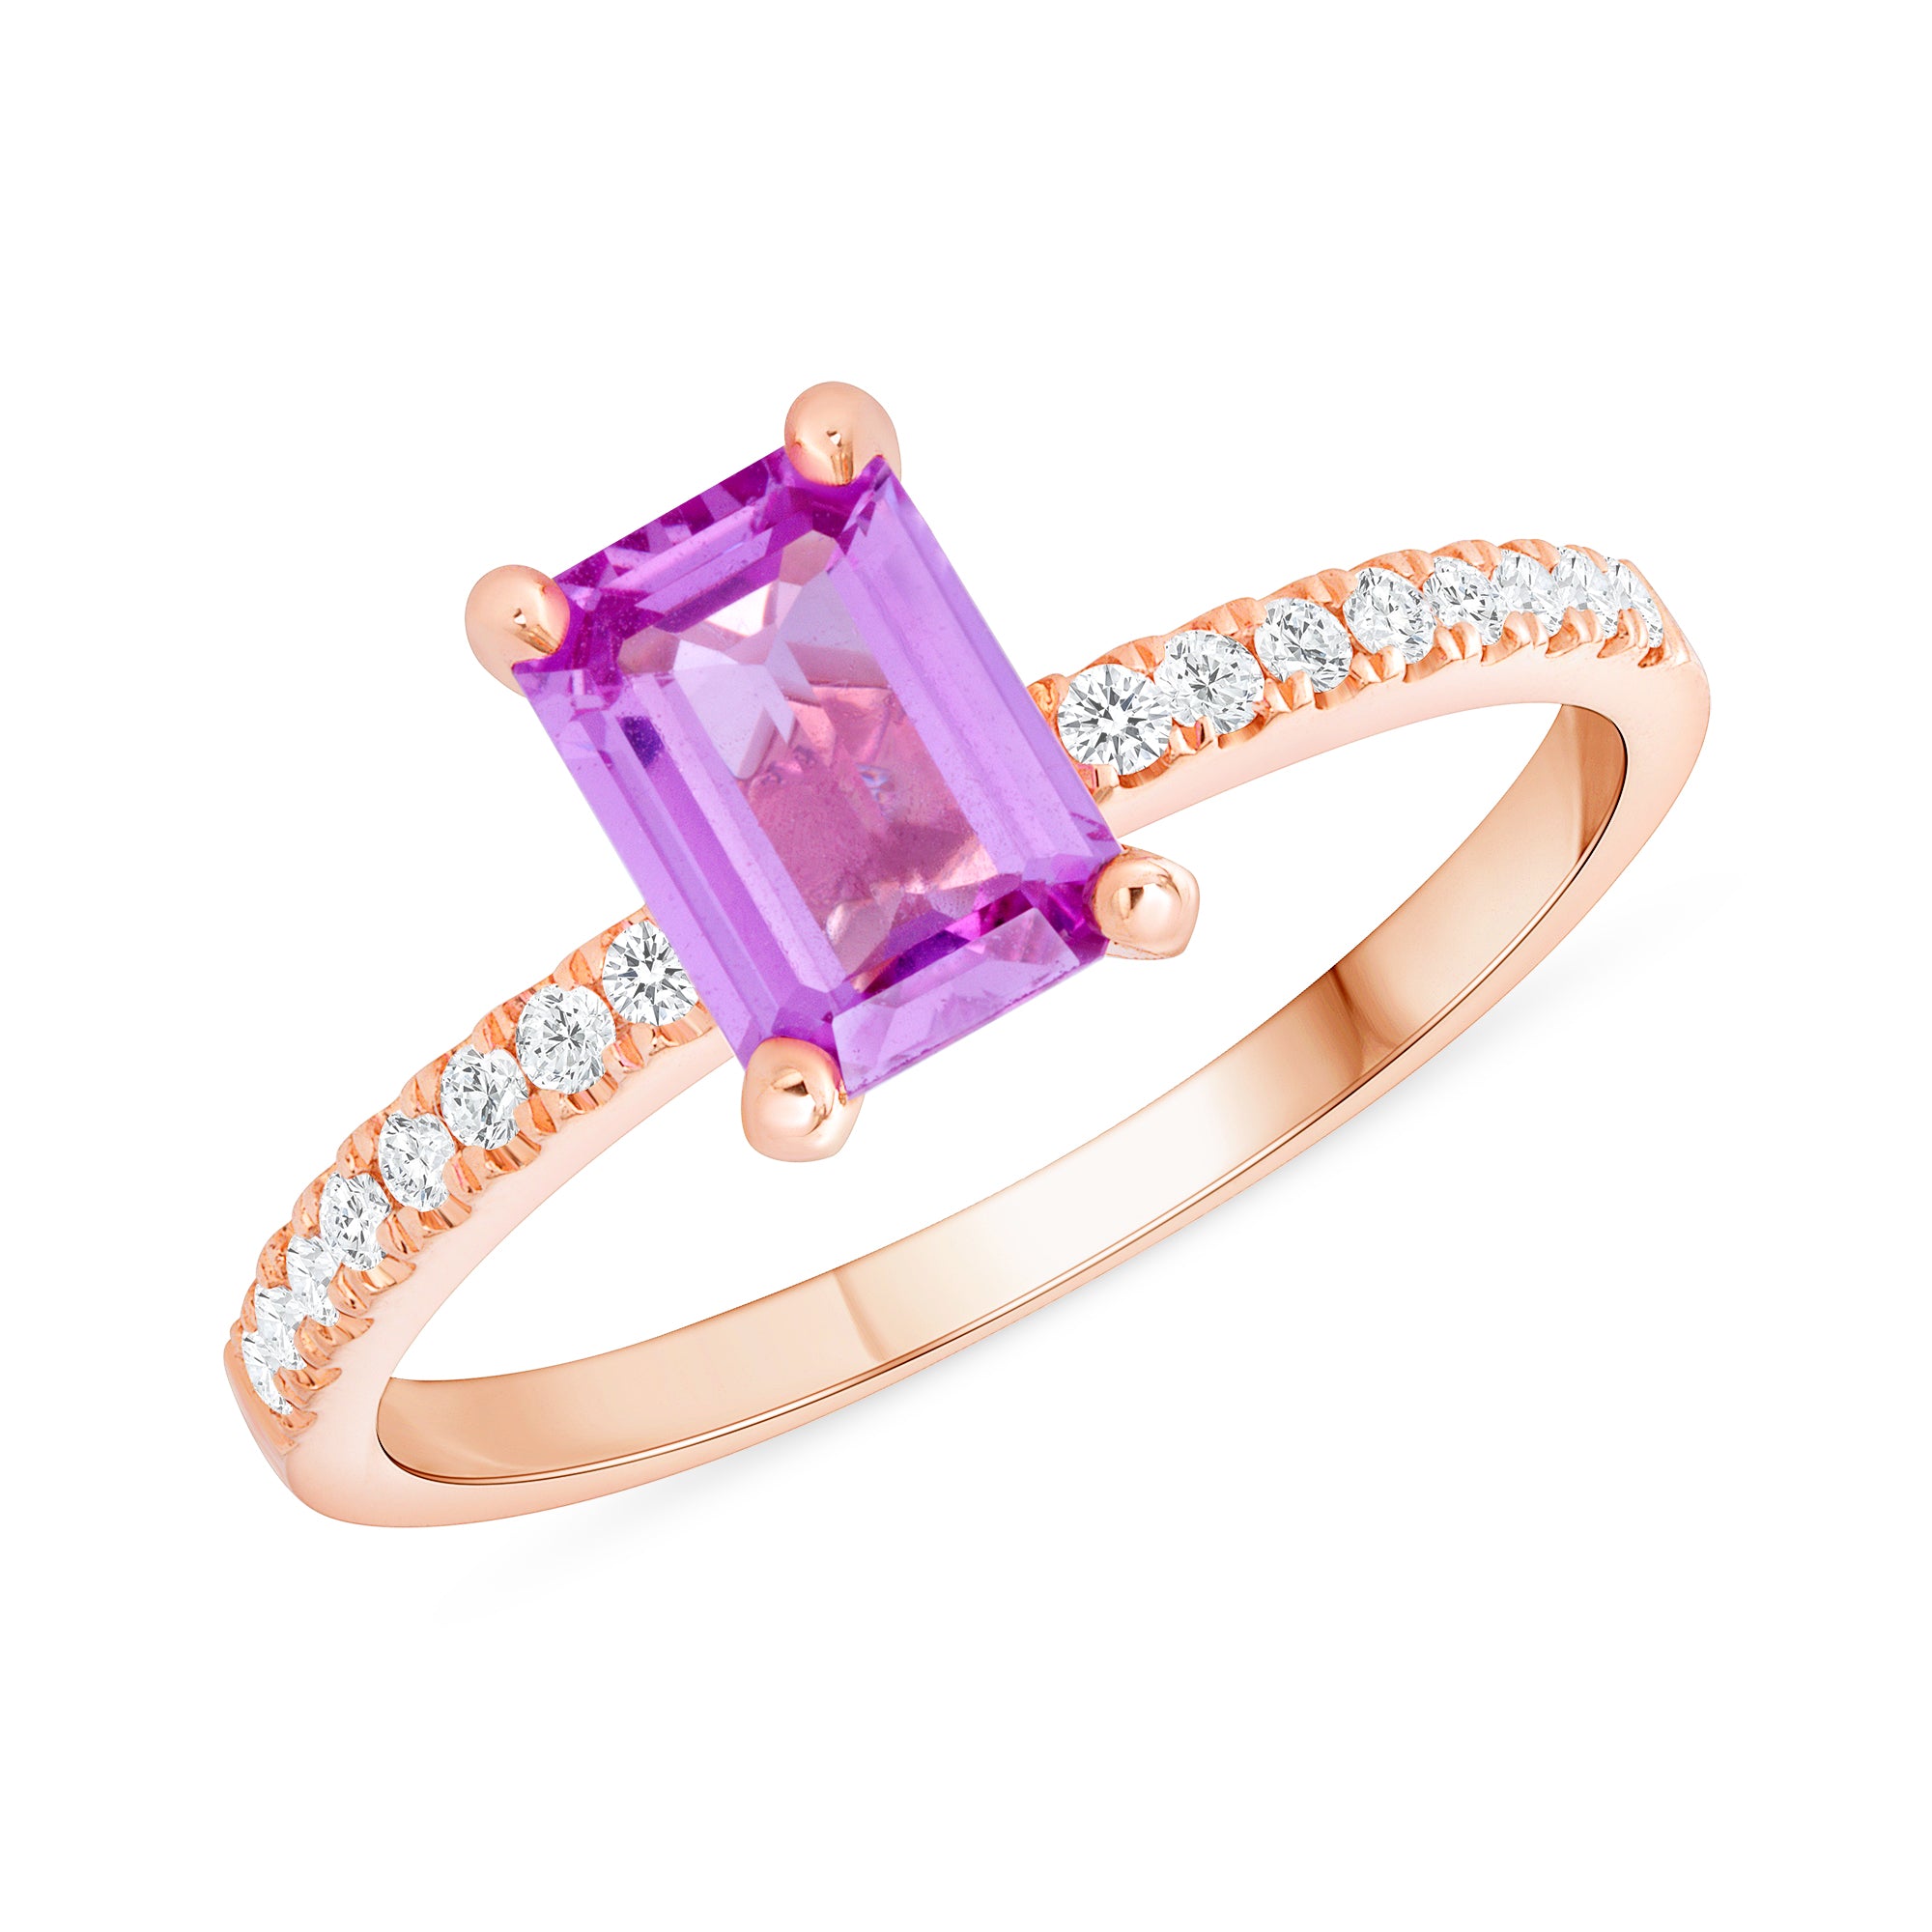 1.08 Ct. Emerald-Cut Pink Sapphire Solitaire Ring with Diamond Accents 14k Rose Gold